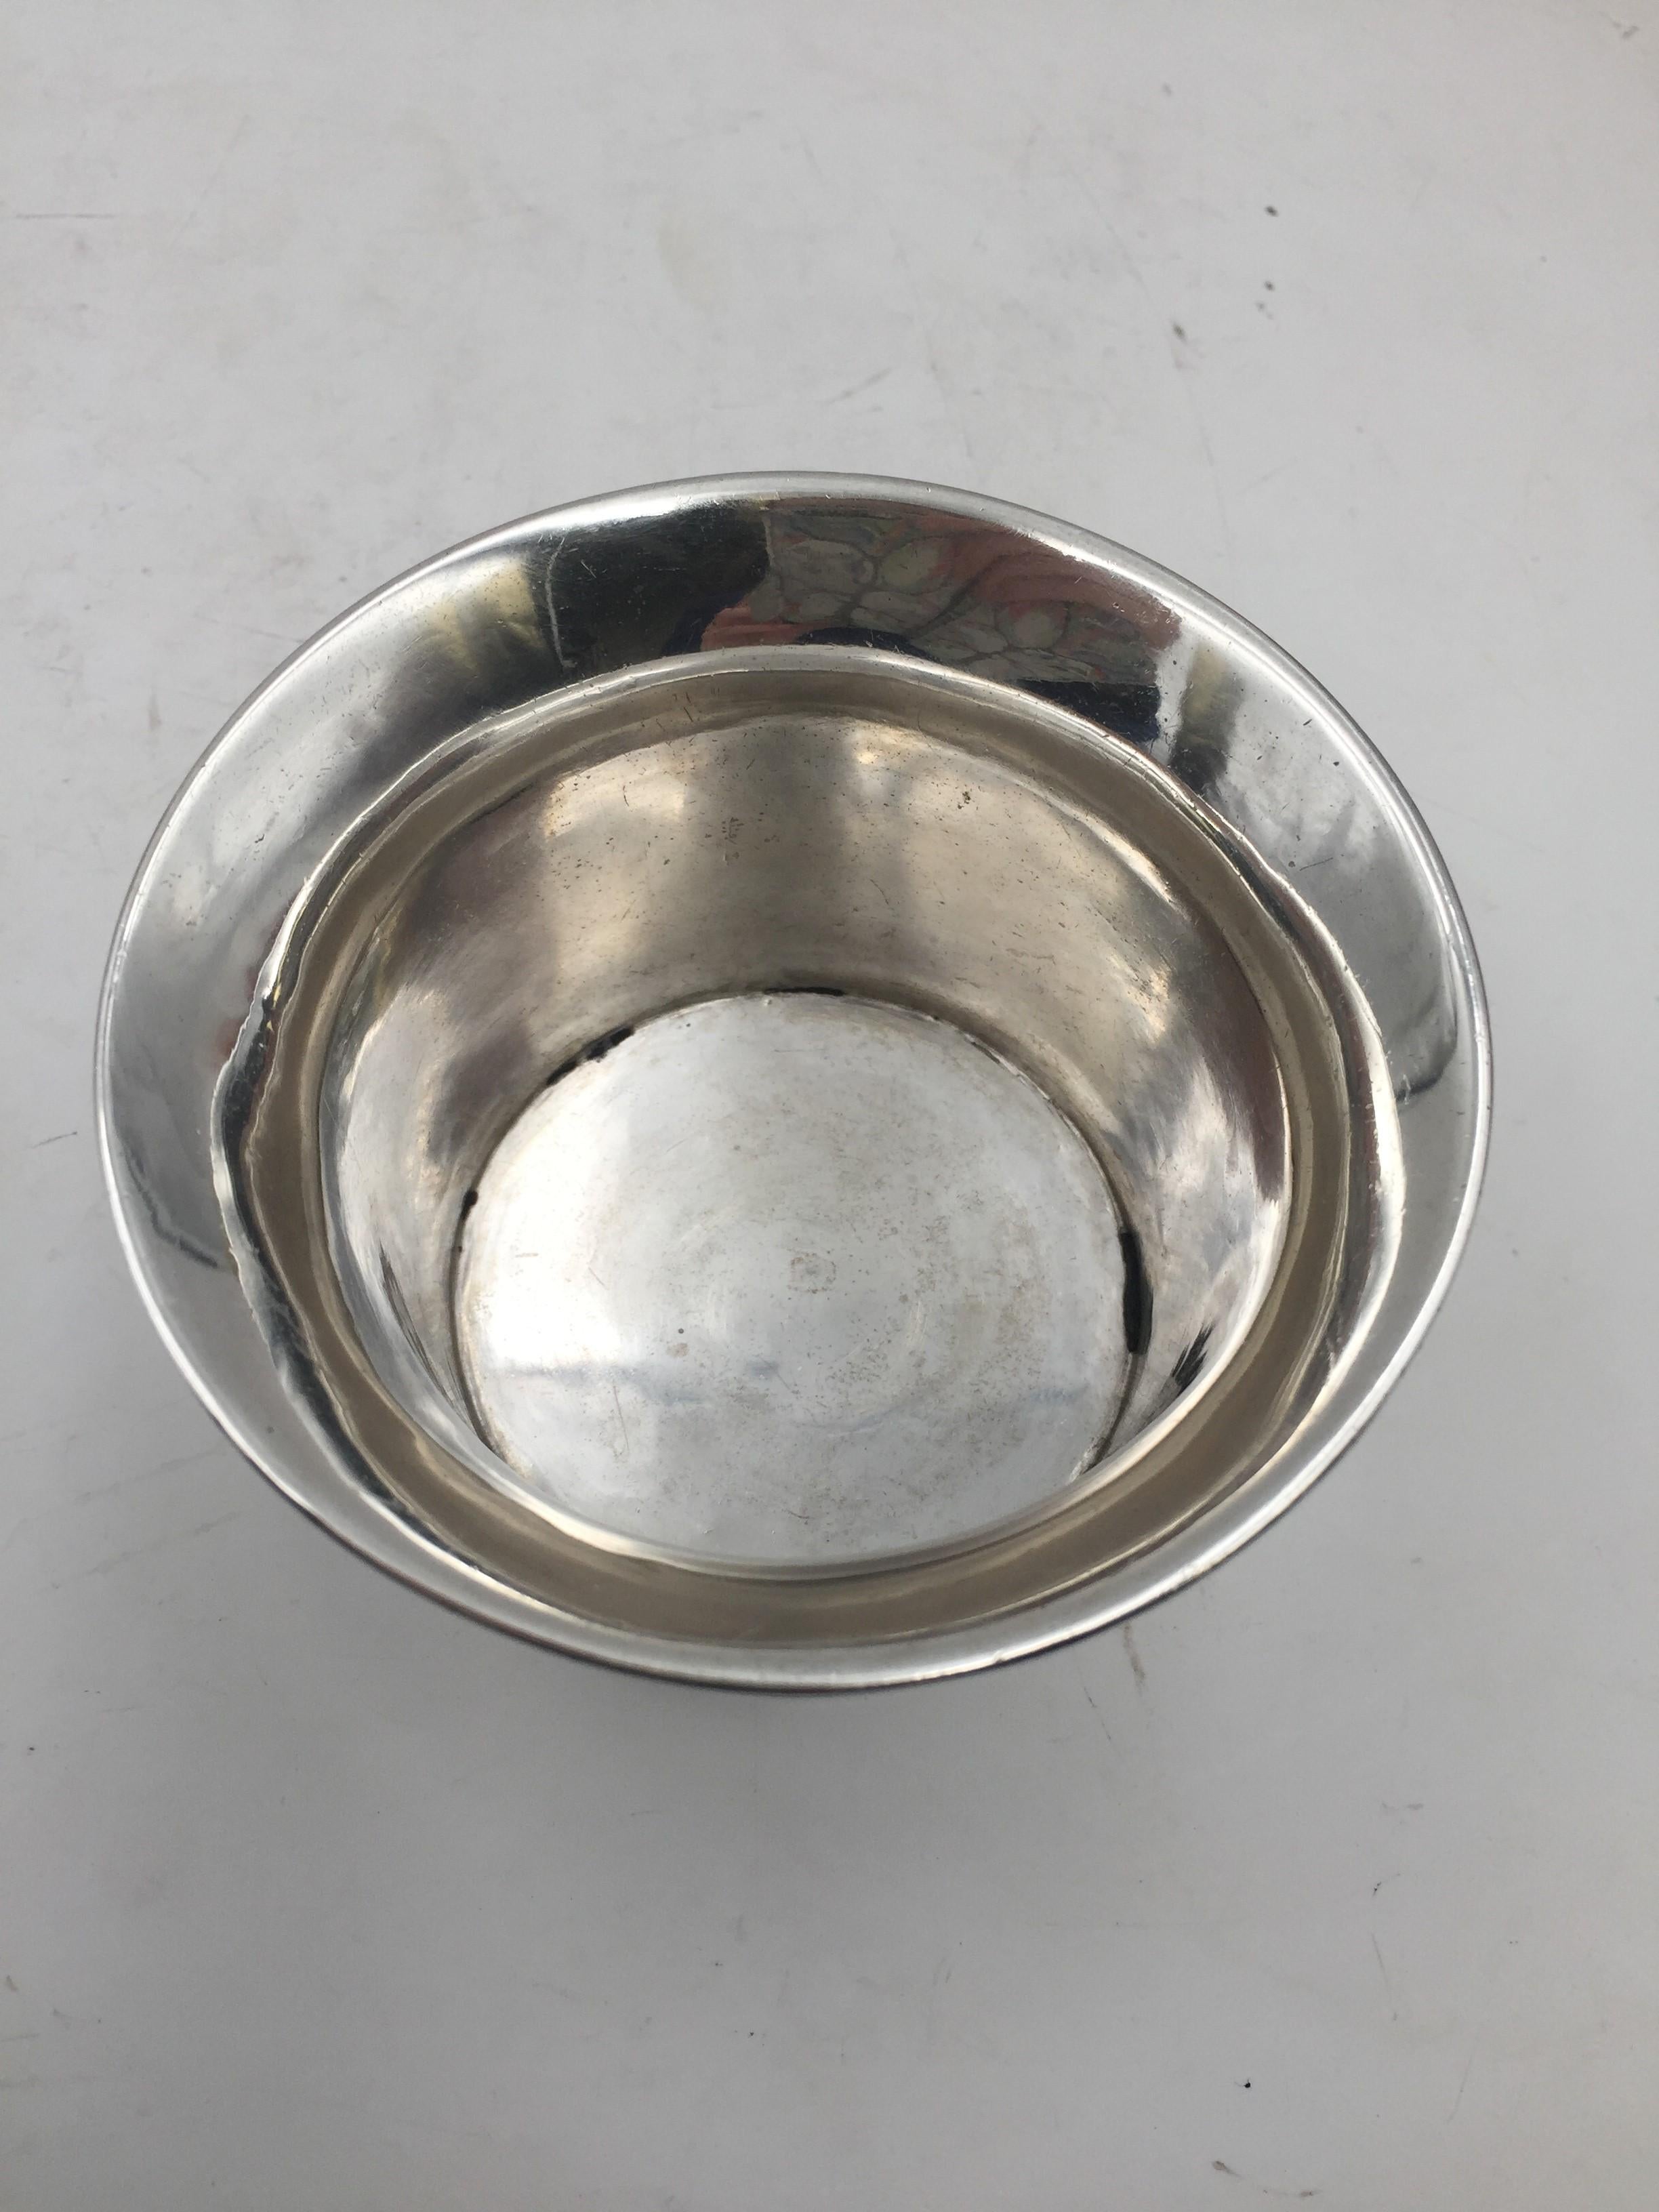 English sterling silver cup from 1760 in Georgian style by a London-based silversmith. It comes from the collection of W. Allston Flagg. It measures 4'' in diameter by 2 1/2'' in height, weighs 4.9 ozt, and bears hallmarks as shown.

According to